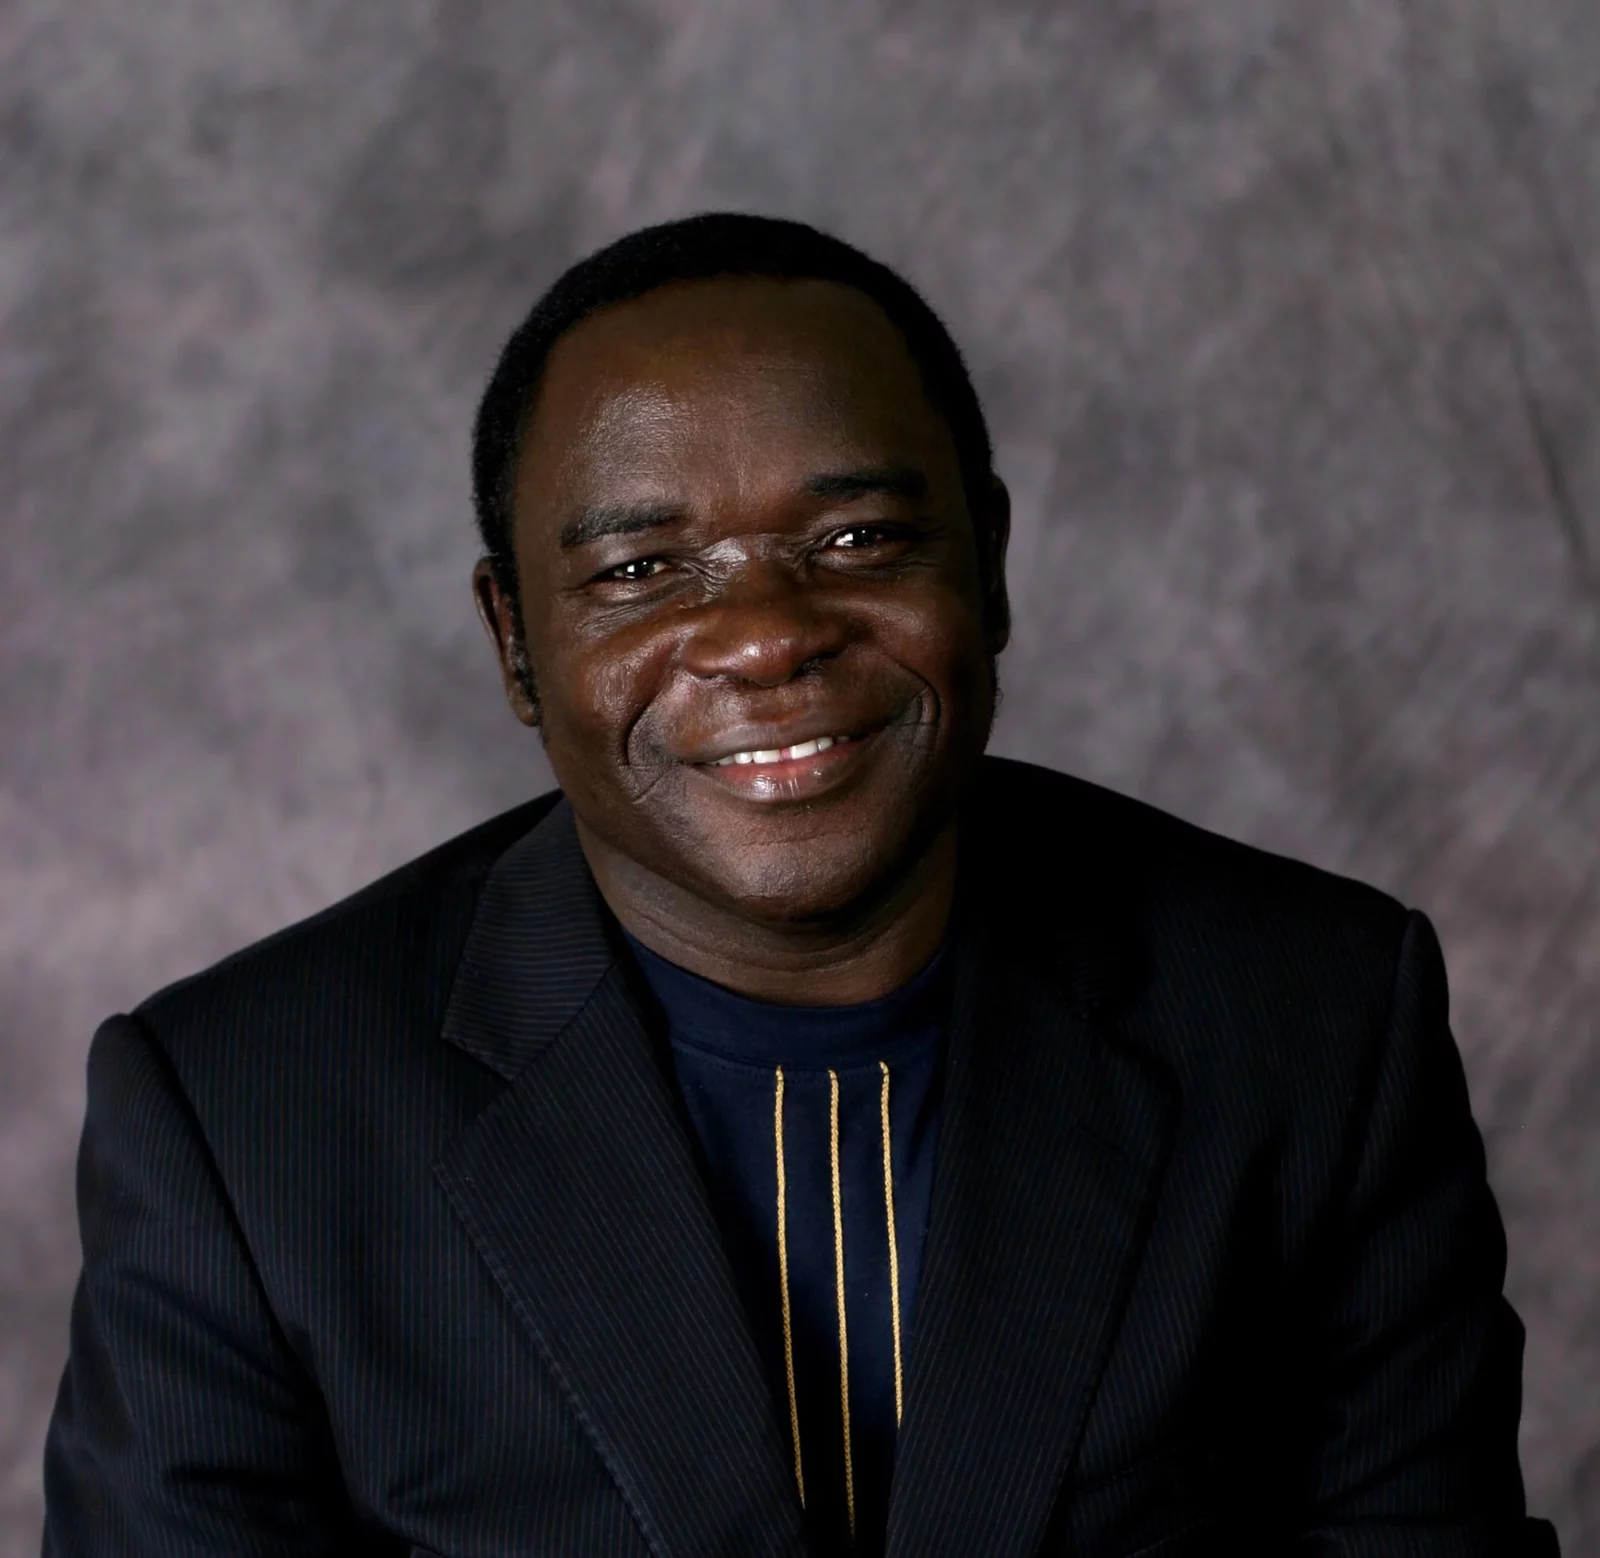 Sokoto Catholic Diocese issues disclaimer as fraudsters impersonate Bishop Kukah online